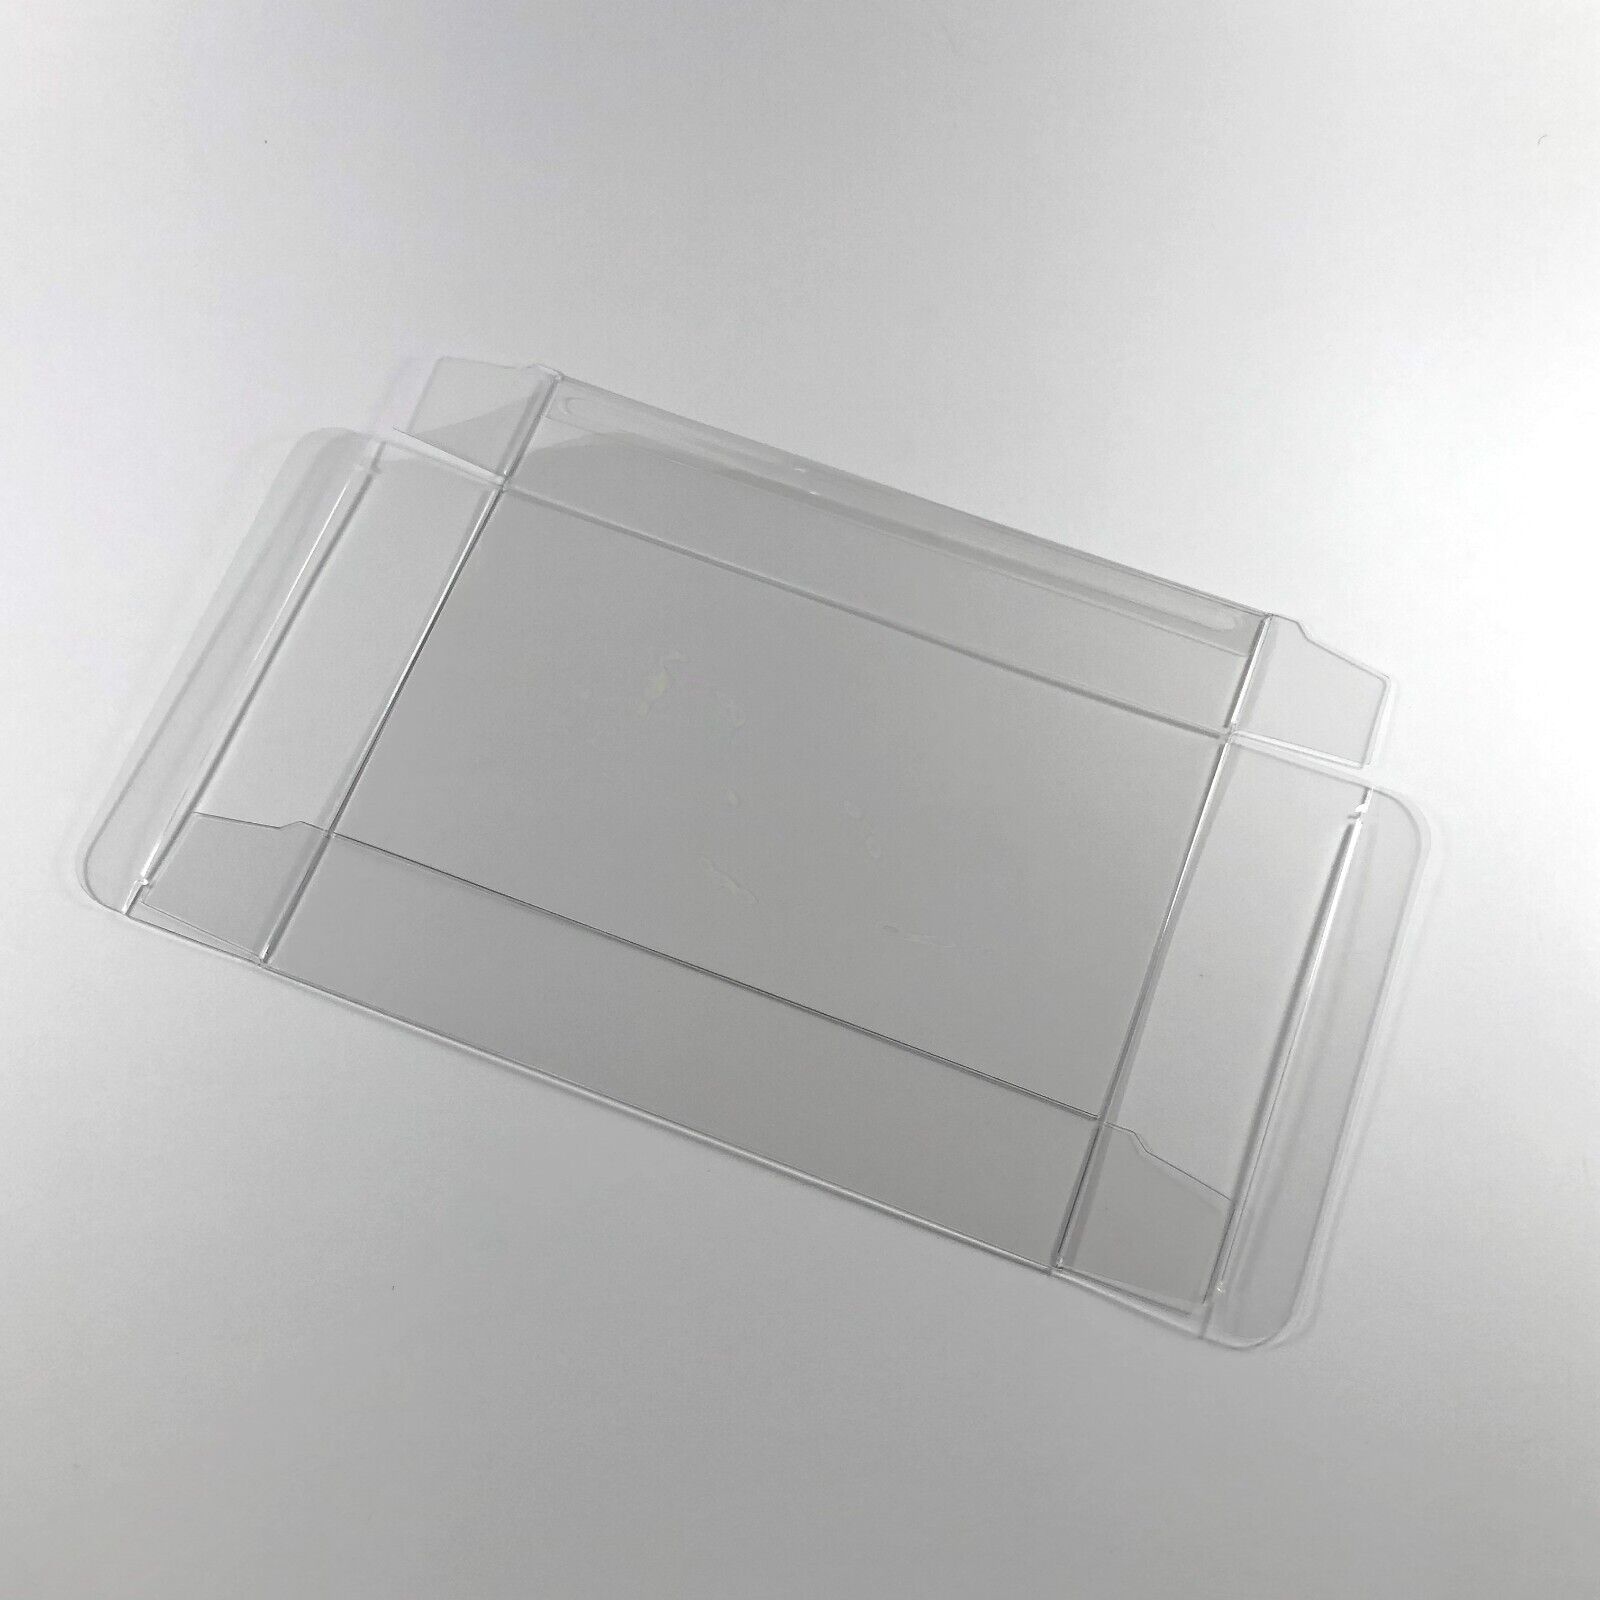 10 SNES Clear Plastic Box Protector Sleeve Case for Complete CIB Games Unbranded/Generic Does Not Apply - фотография #11